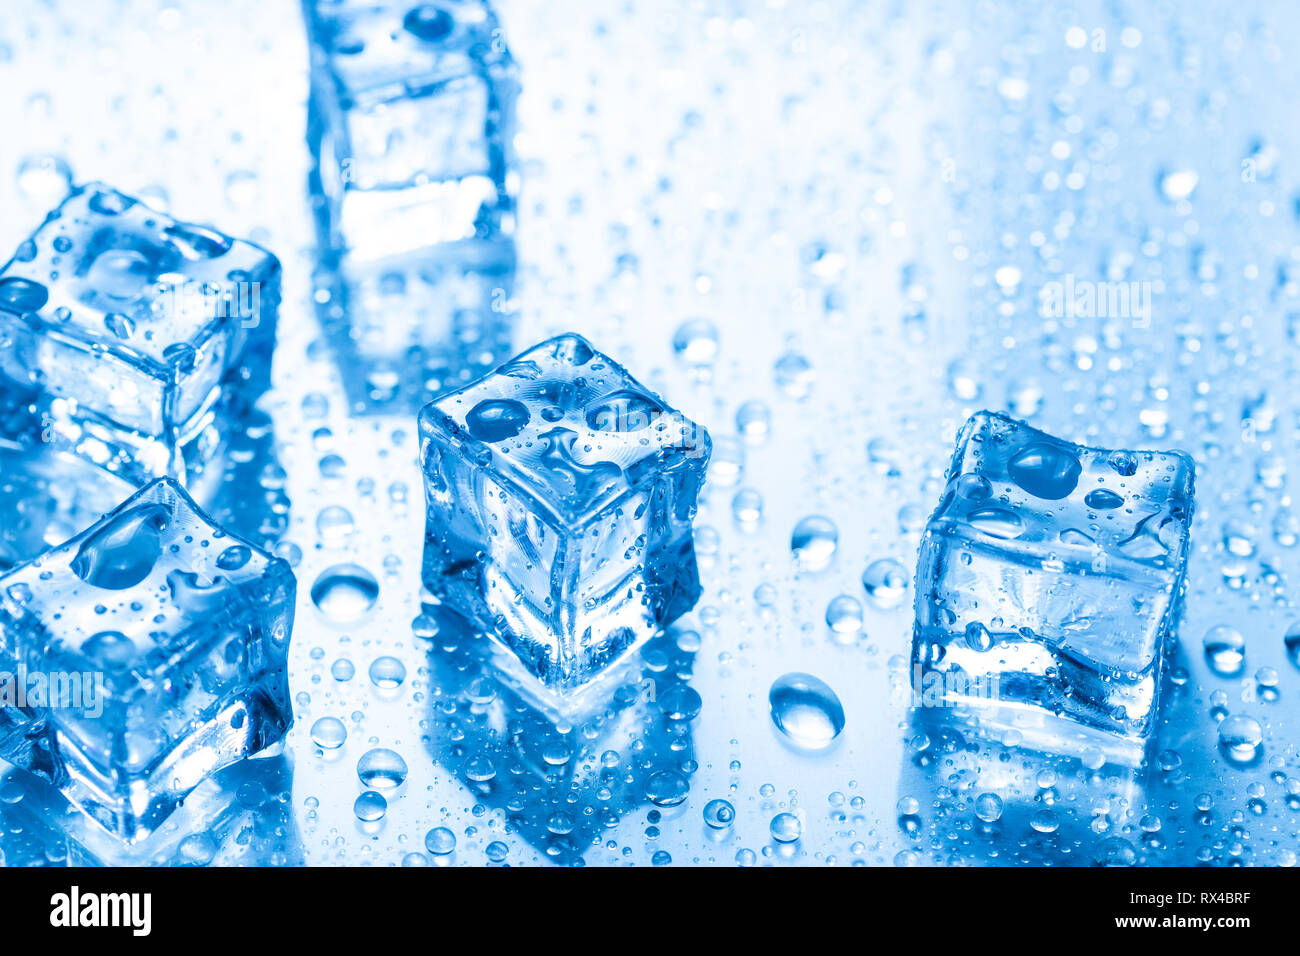 Ice cubes with water drops Stock Photo